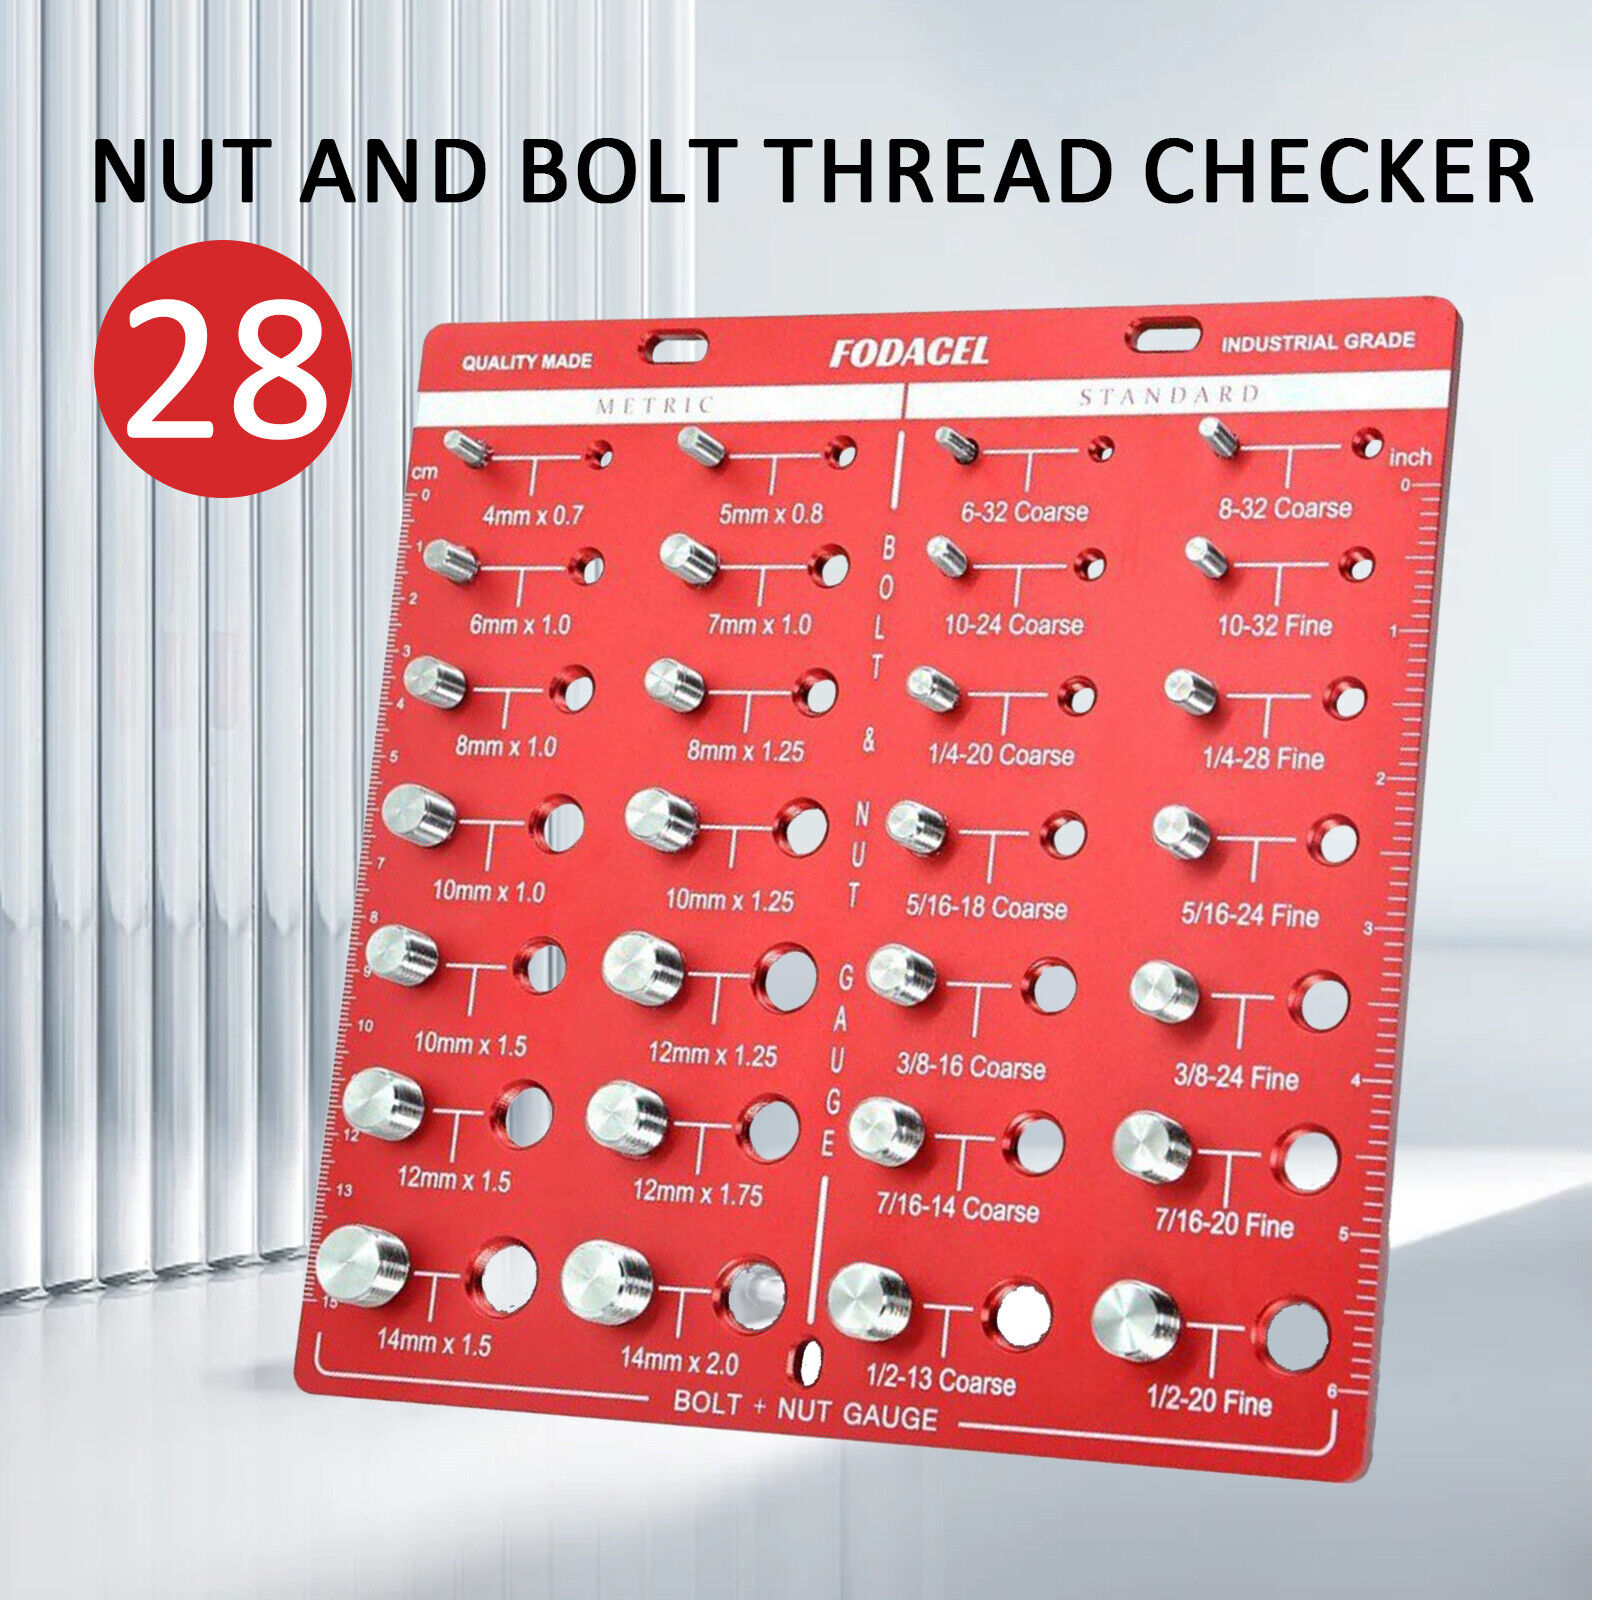 US Nut and Bolt Thread Checker 28 Thread Identifier Gauge Inch and Metric Screw